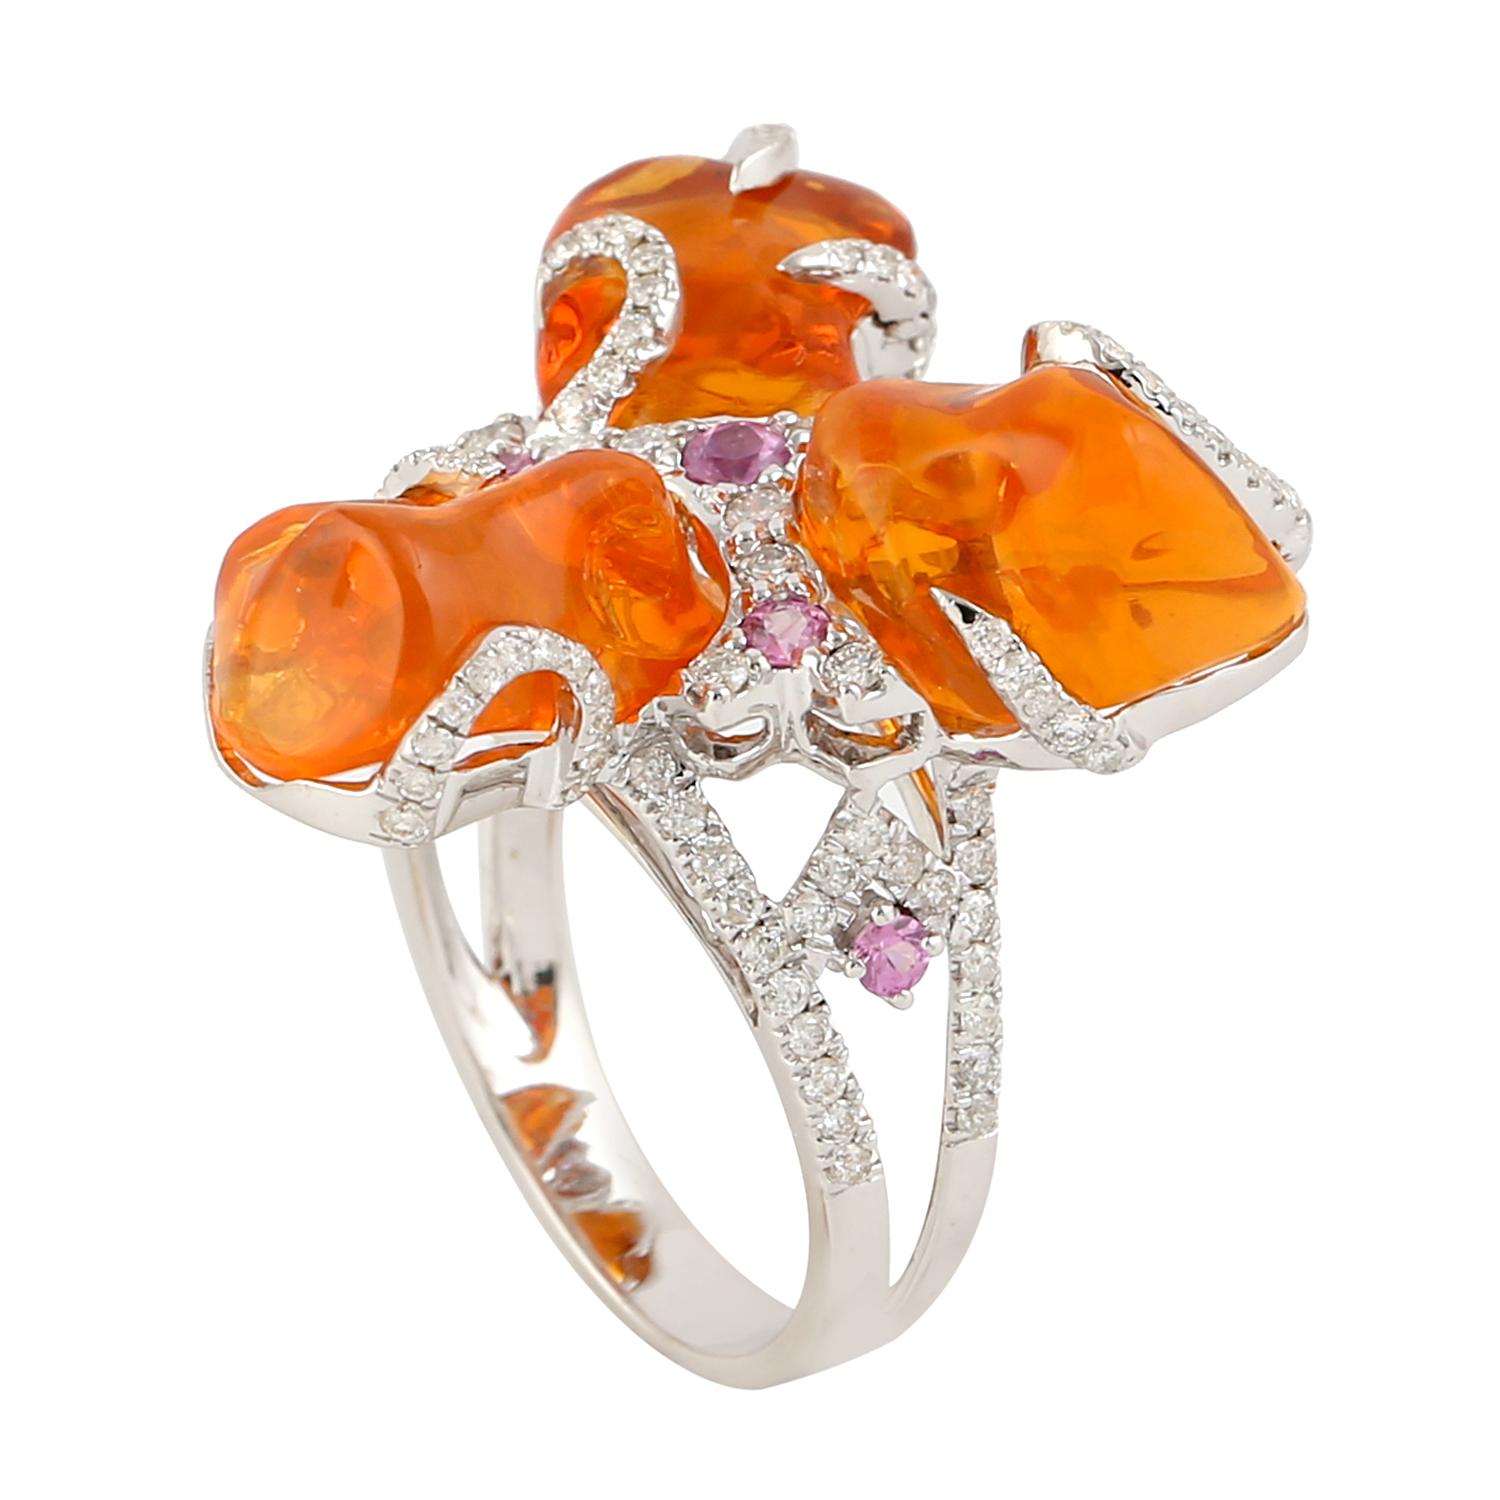 Mixed Cut 3 Stone Fire Opal Ring Equipped With Sapphire & Diamonds In 18k White Gold For Sale